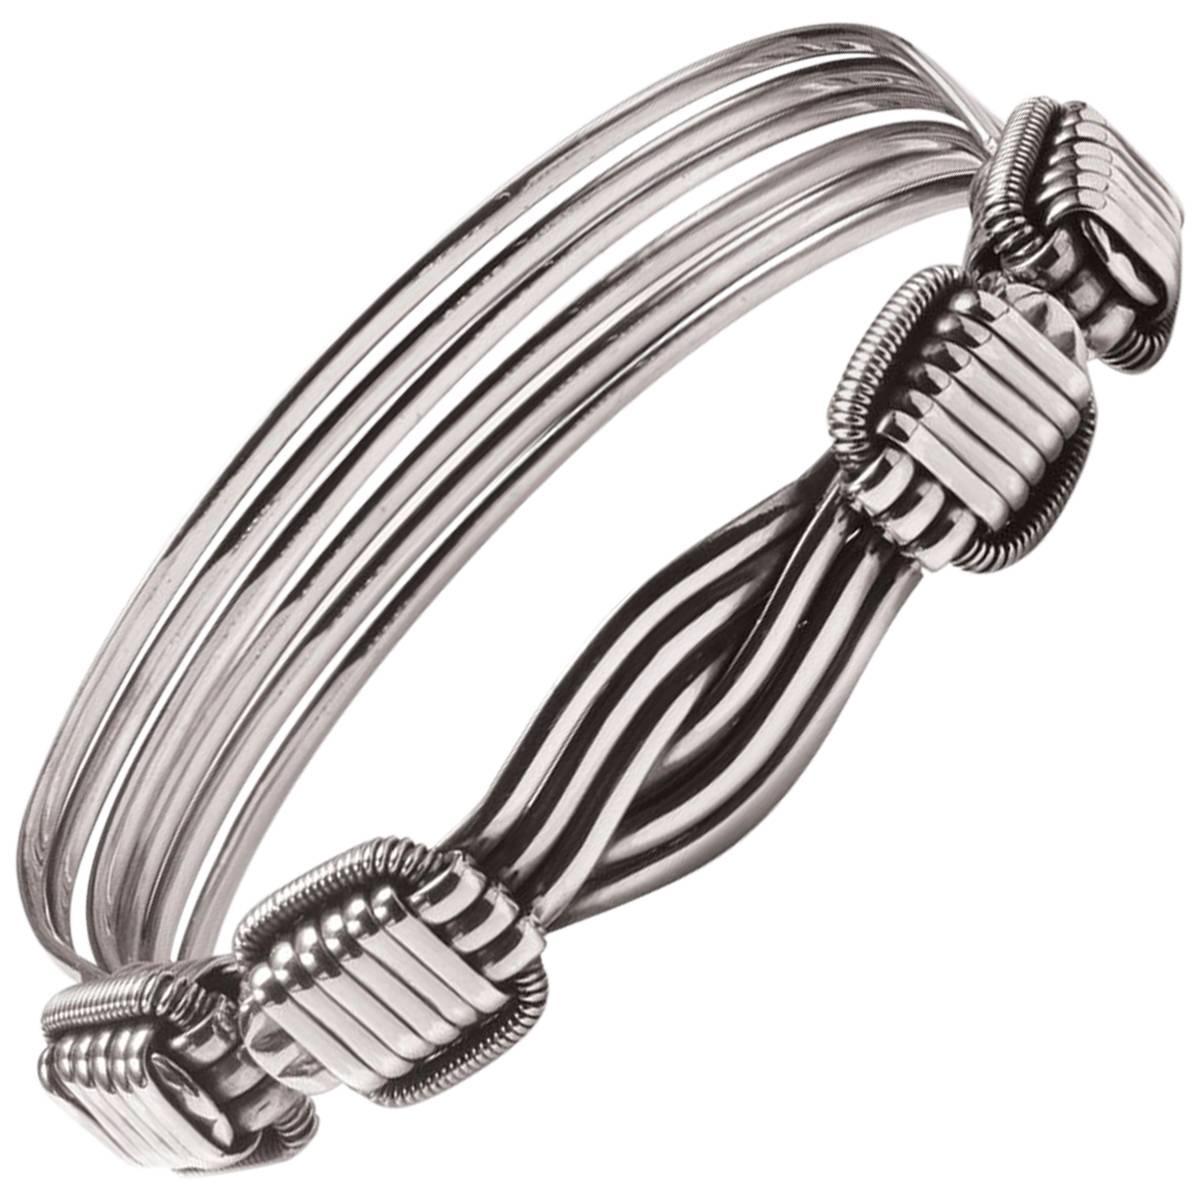 Amazon.com: African Elephant Knot Bracelet - 3 Knot SILVER Color Metal V2  CHUNKY made in Zimbabwe : Everything Else